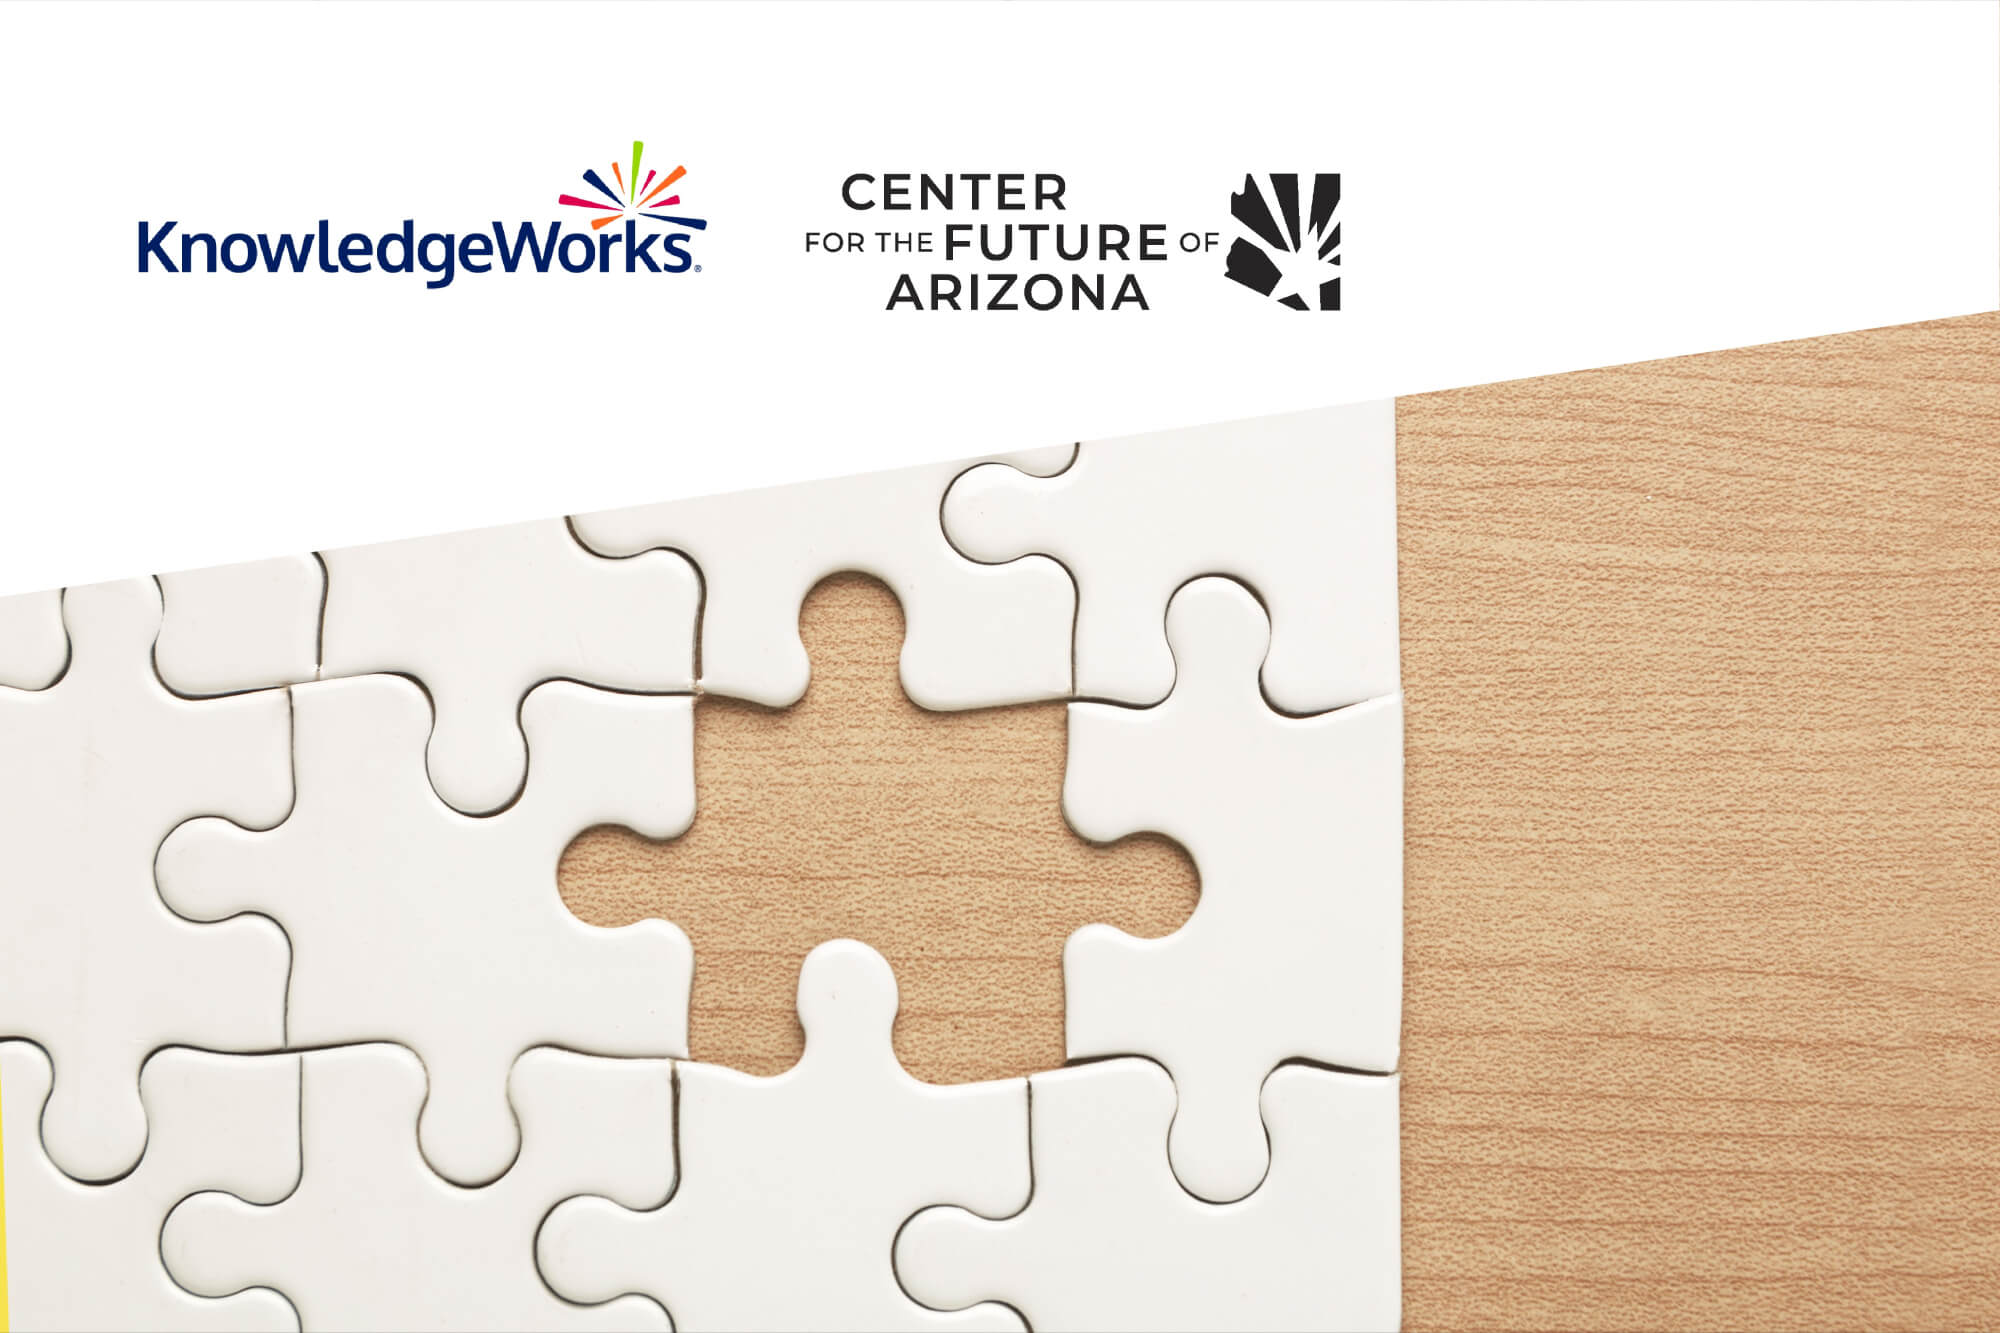 Puzzle on table with KnowledgeWorks and Center for the Future of Arizona logos